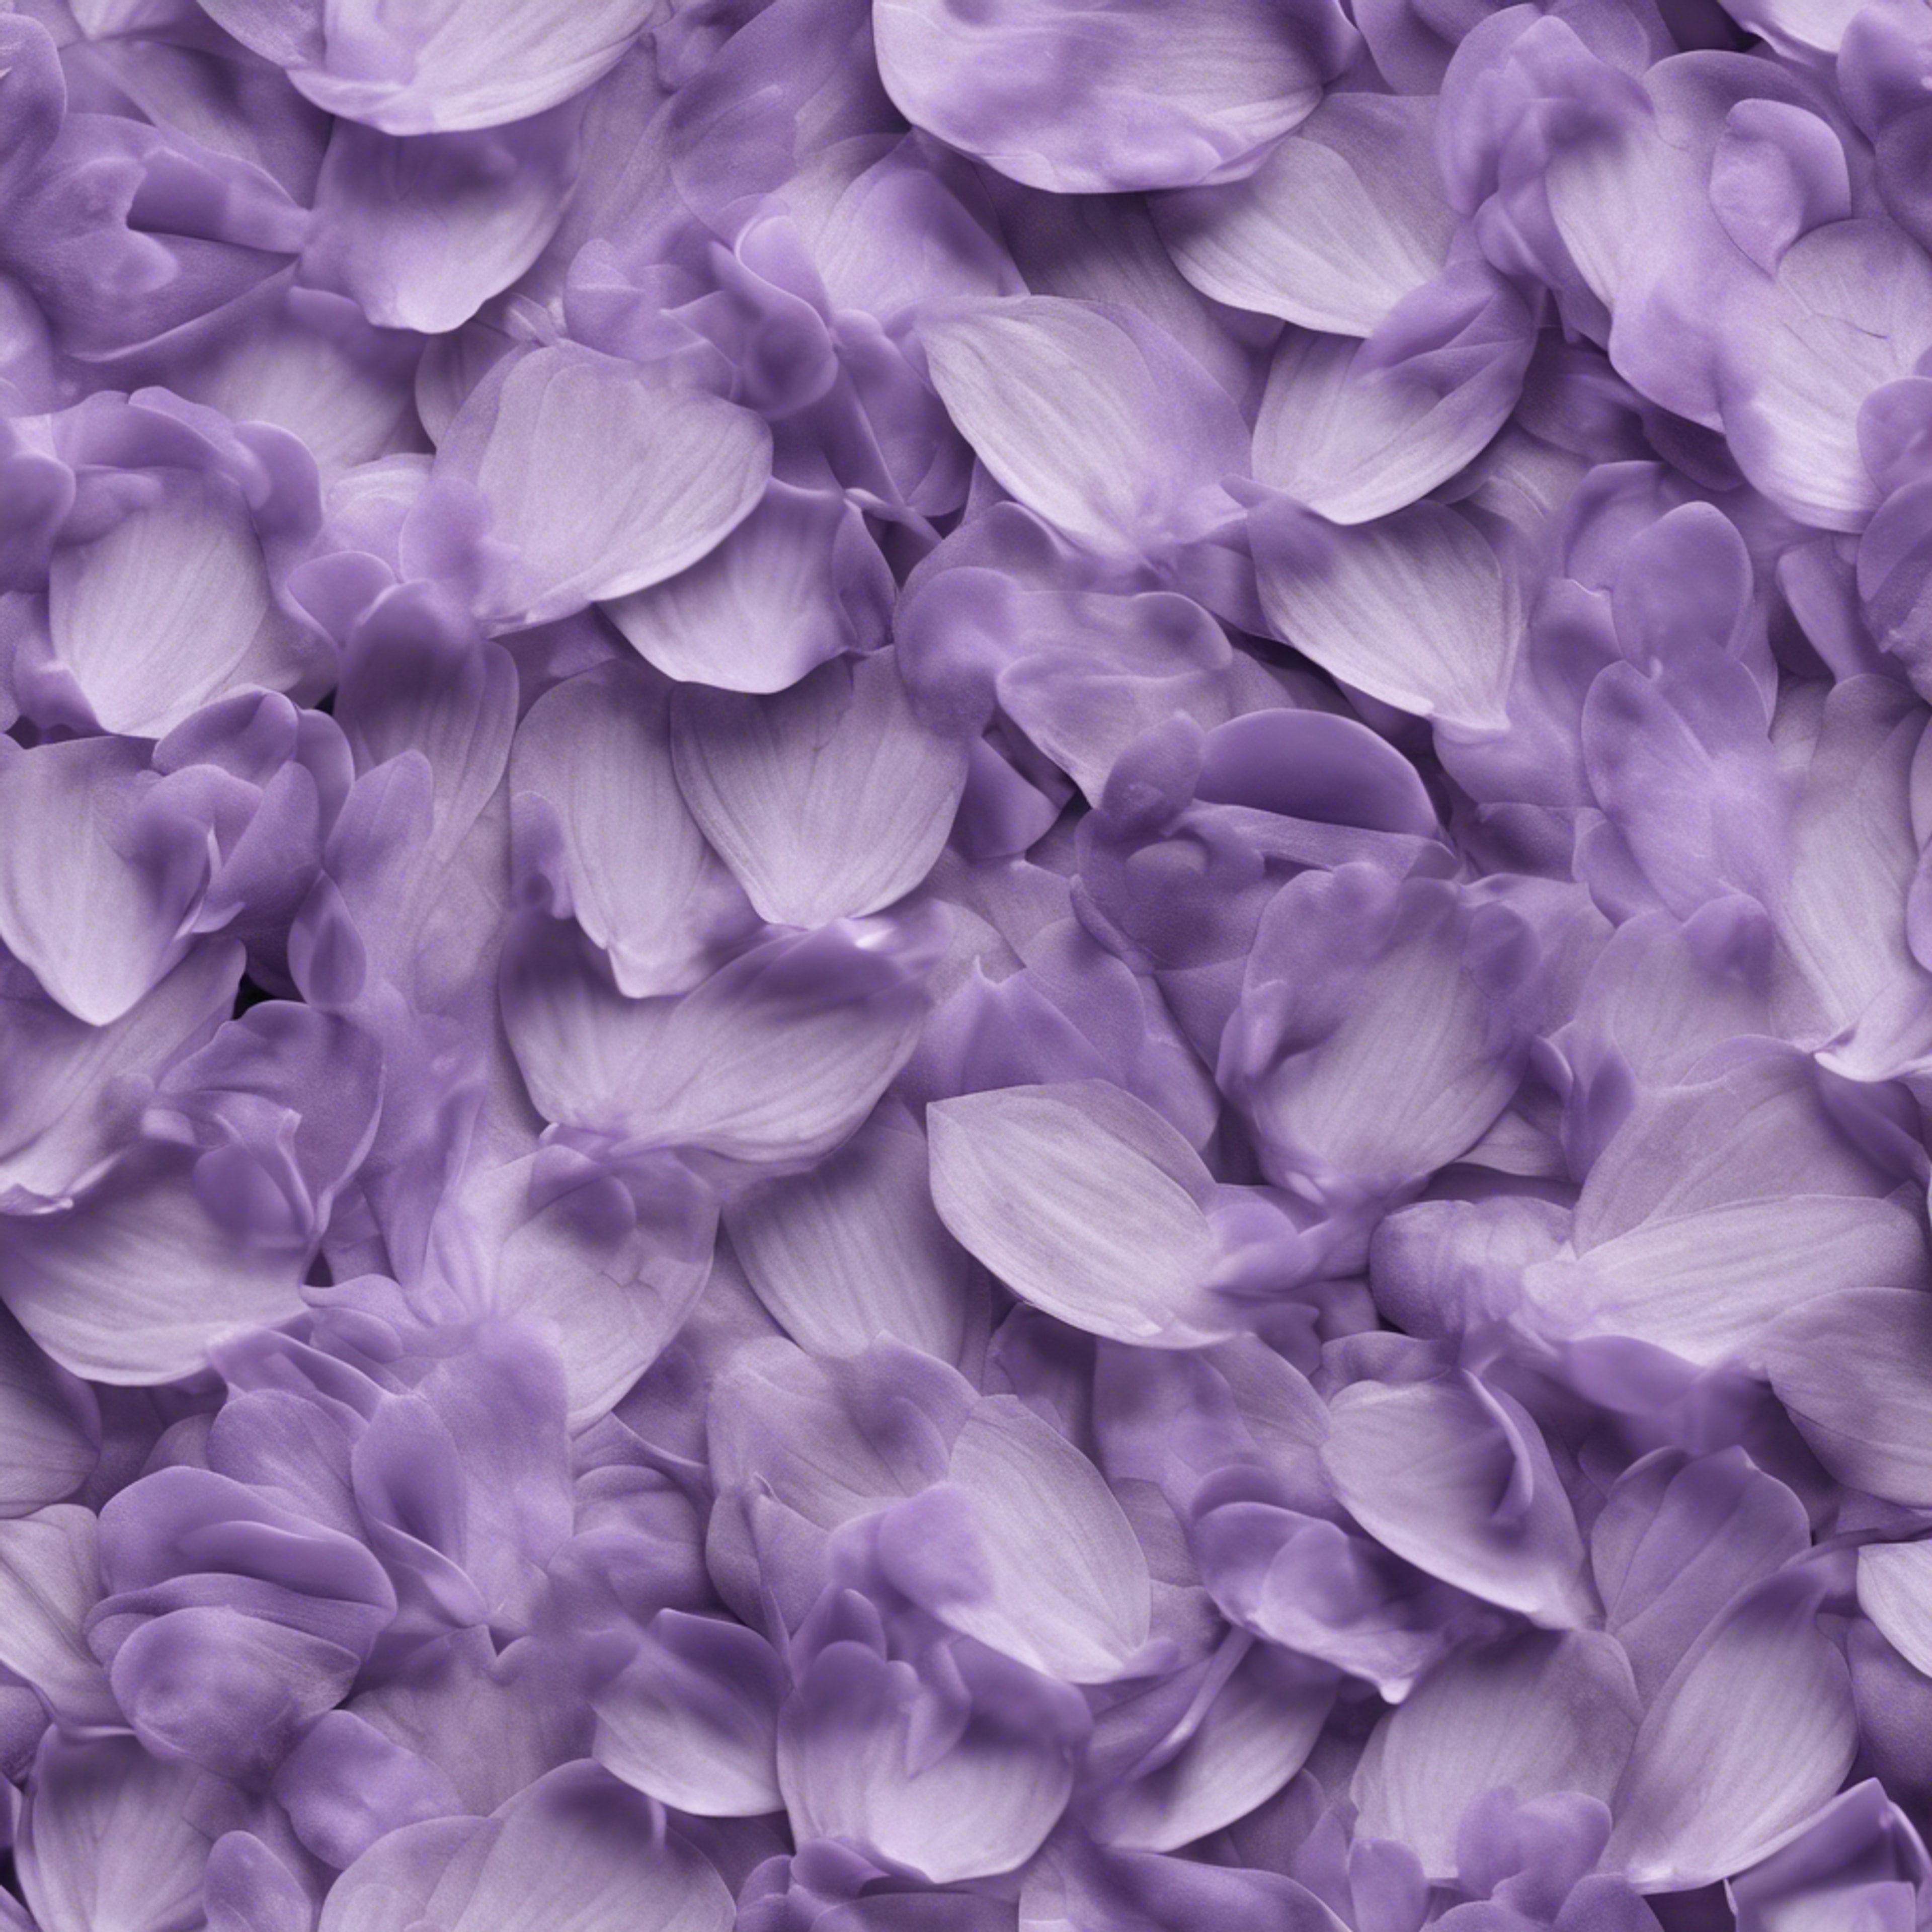 Seamless delicate pattern of layered lavender petals Tapet[df581ced6ed94056816b]